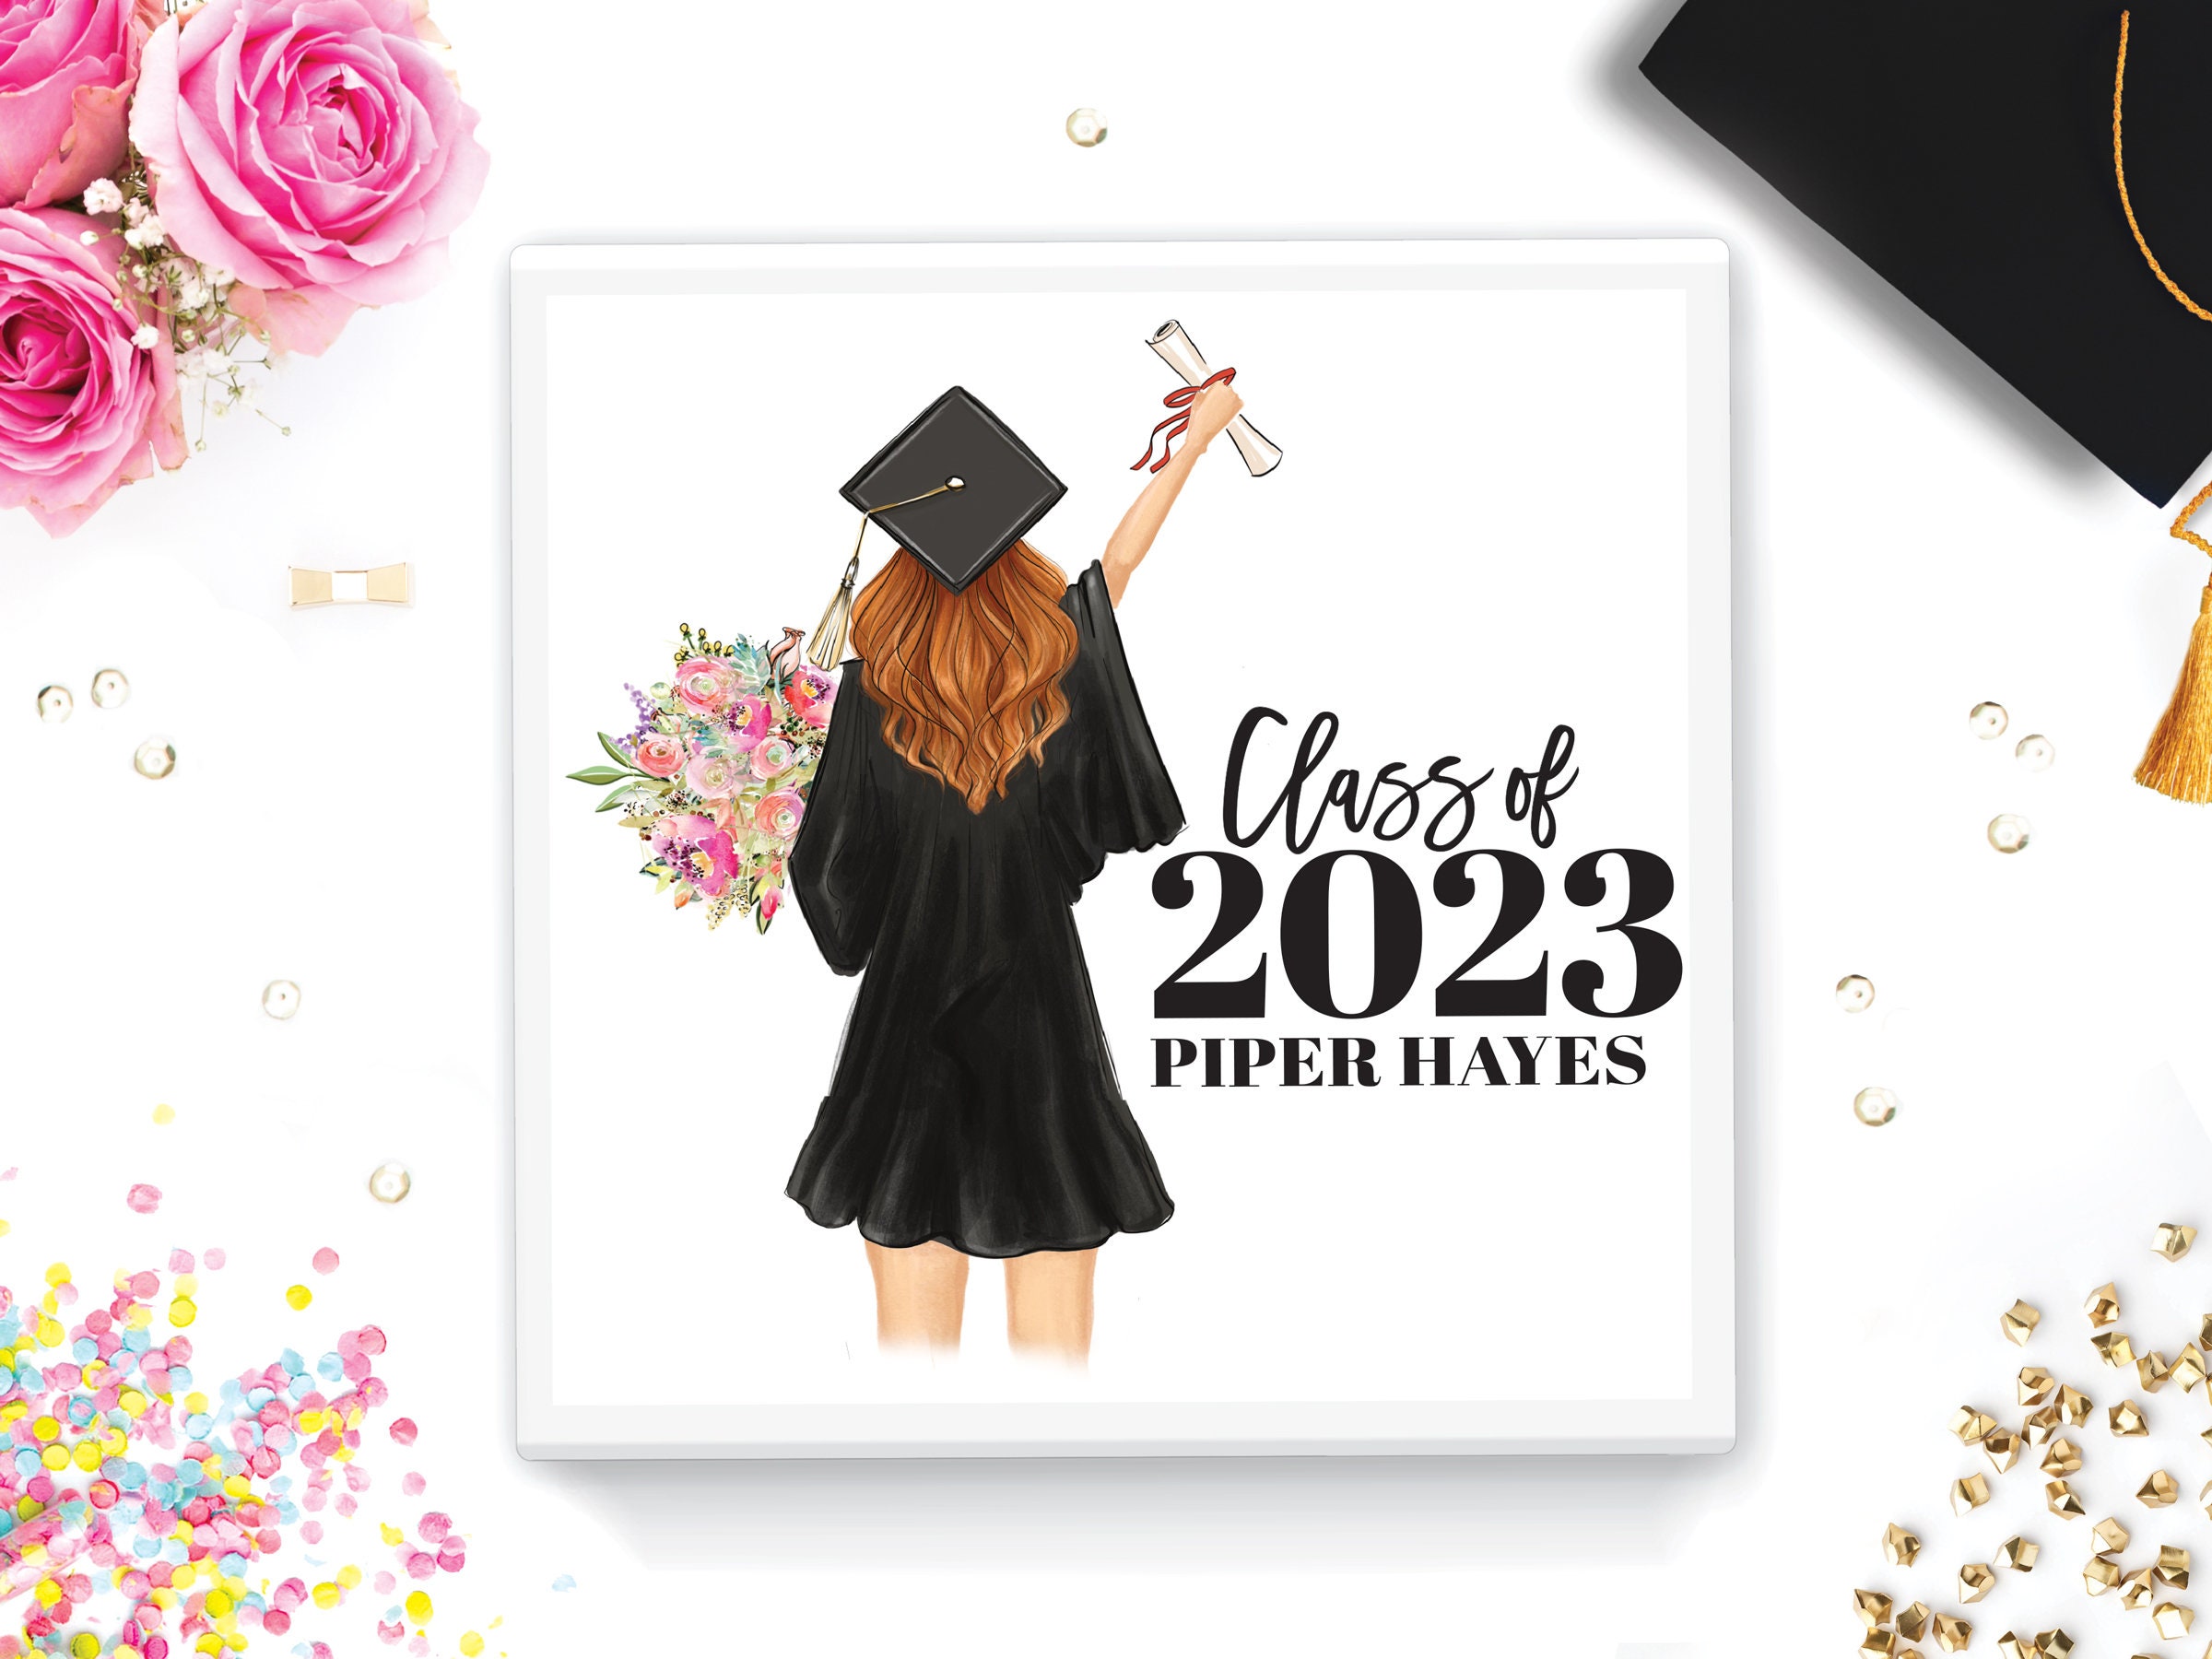 Graduation Gifts for Her Class of 2023, Graduation Gift Box for Her College  Graduation or High School Grad Gifts GGB03 